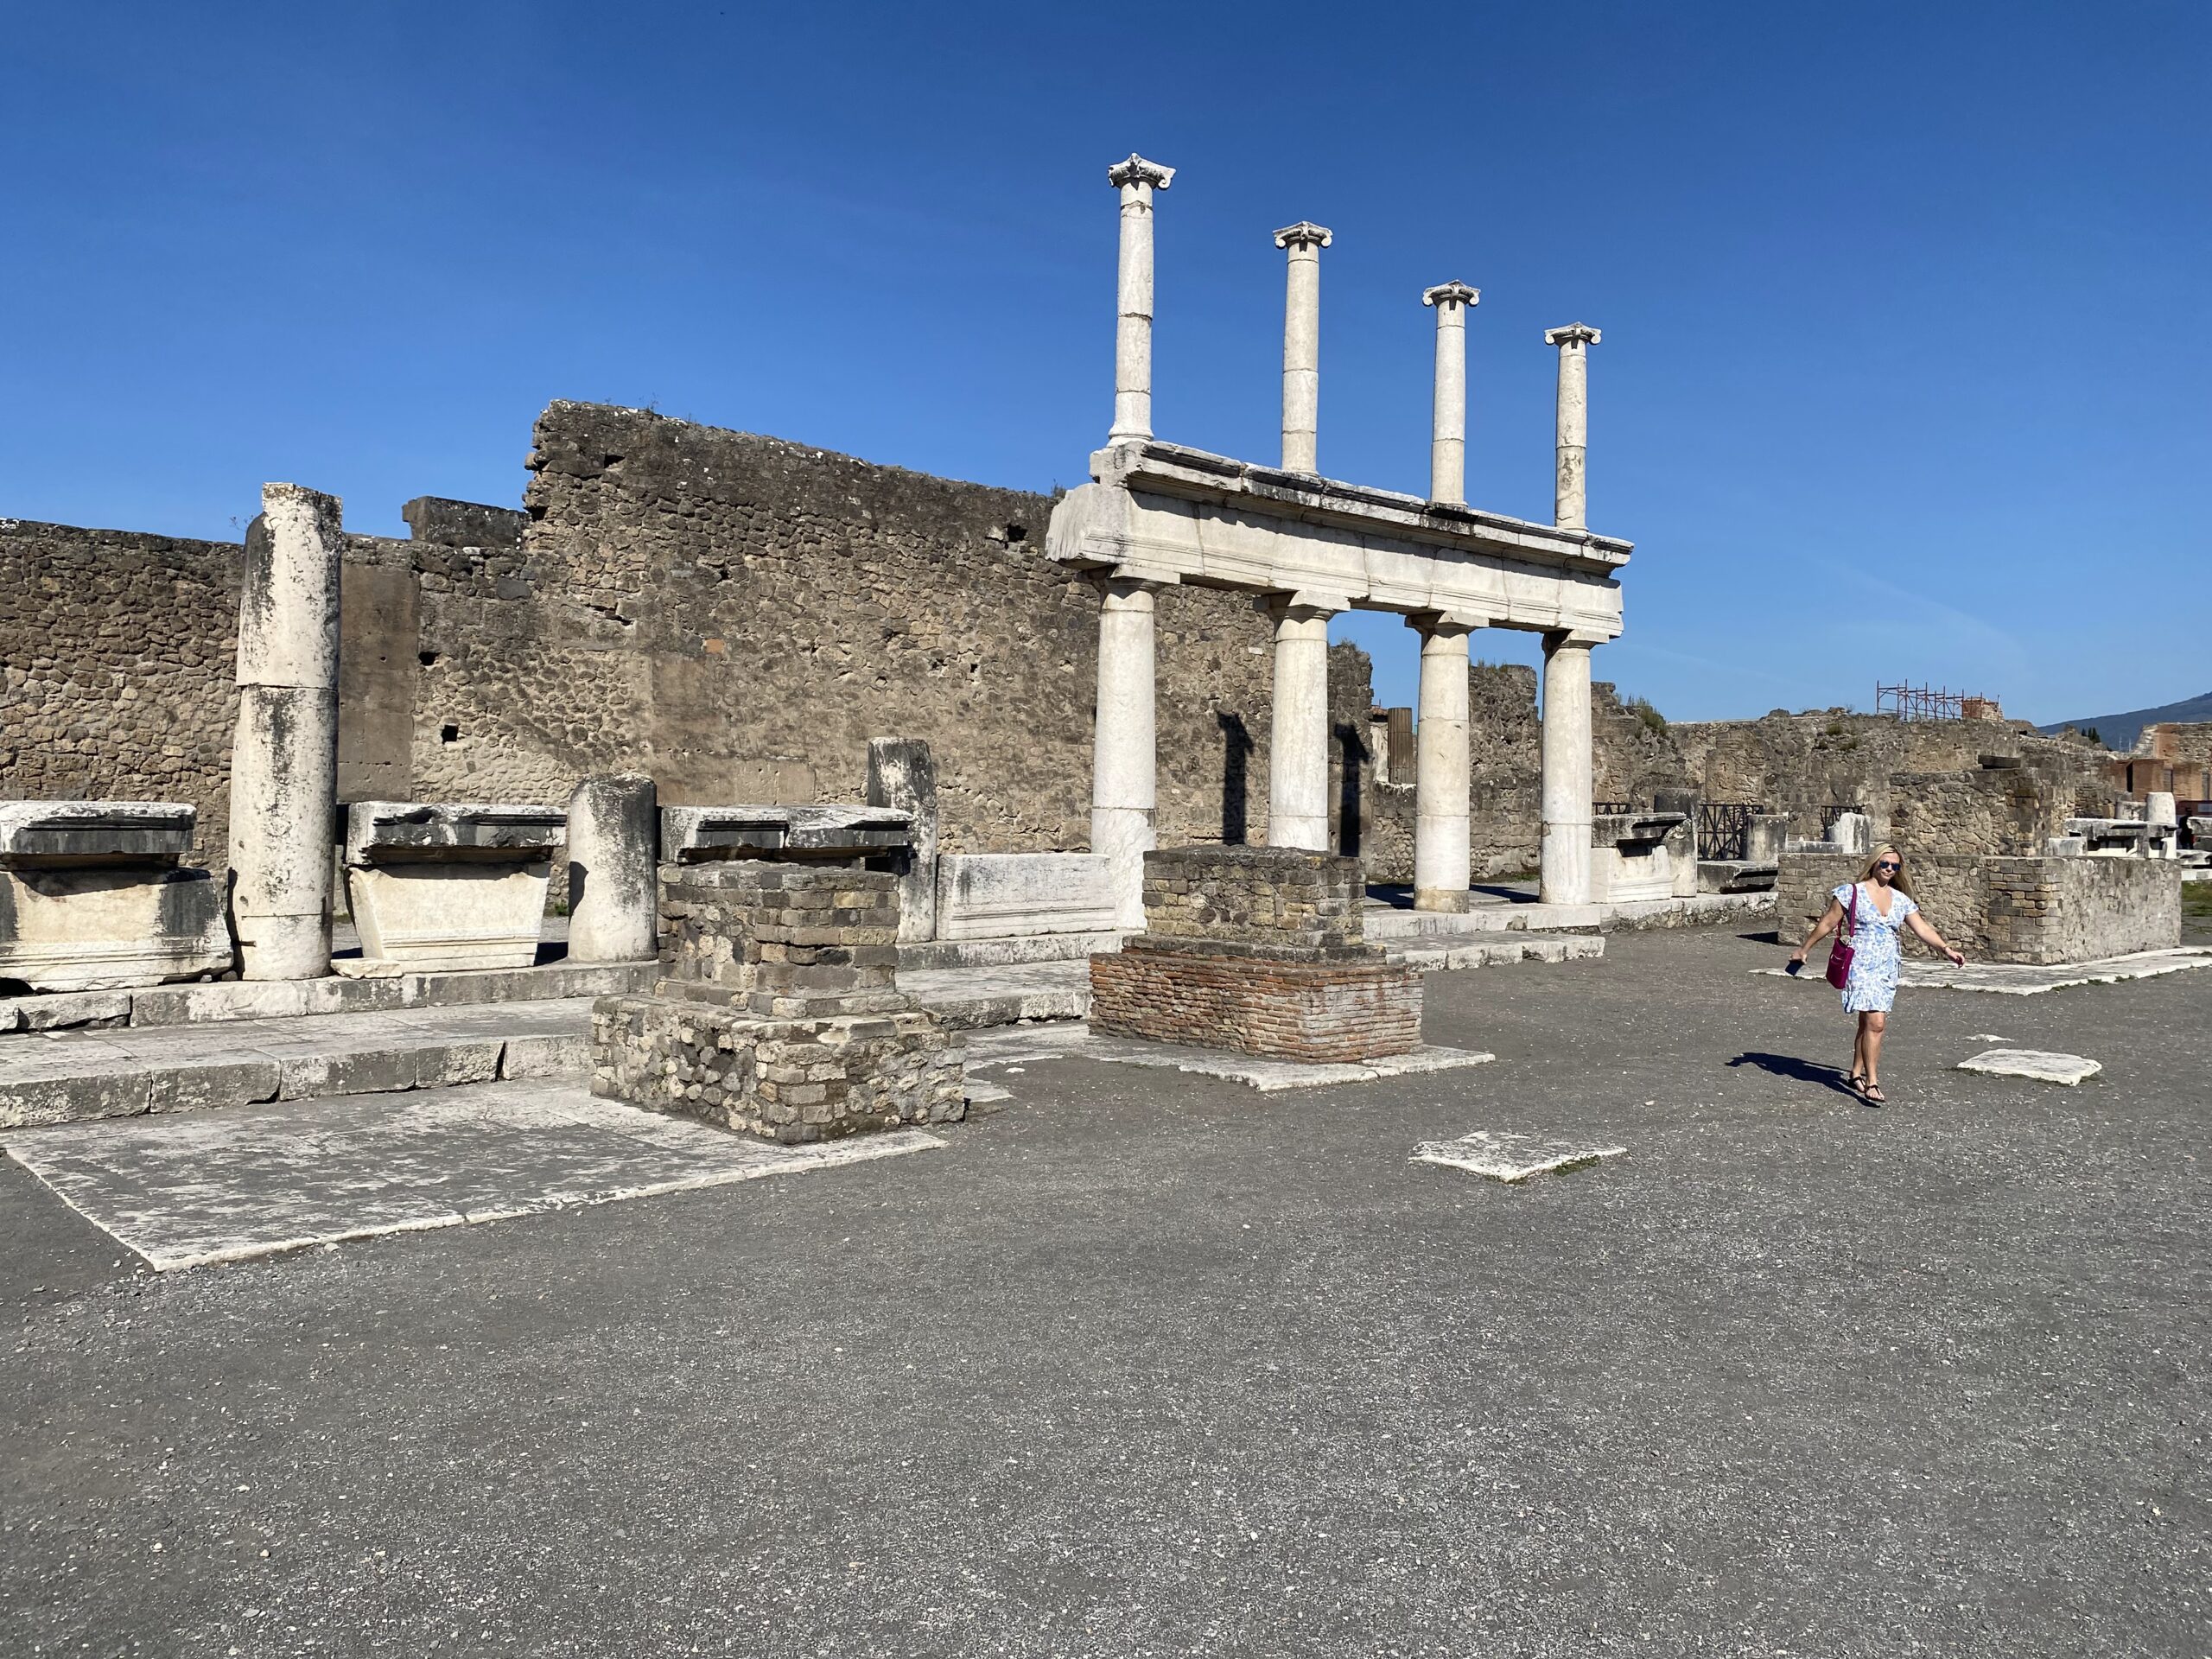 A day trip to Pompeii and Naples from Rome